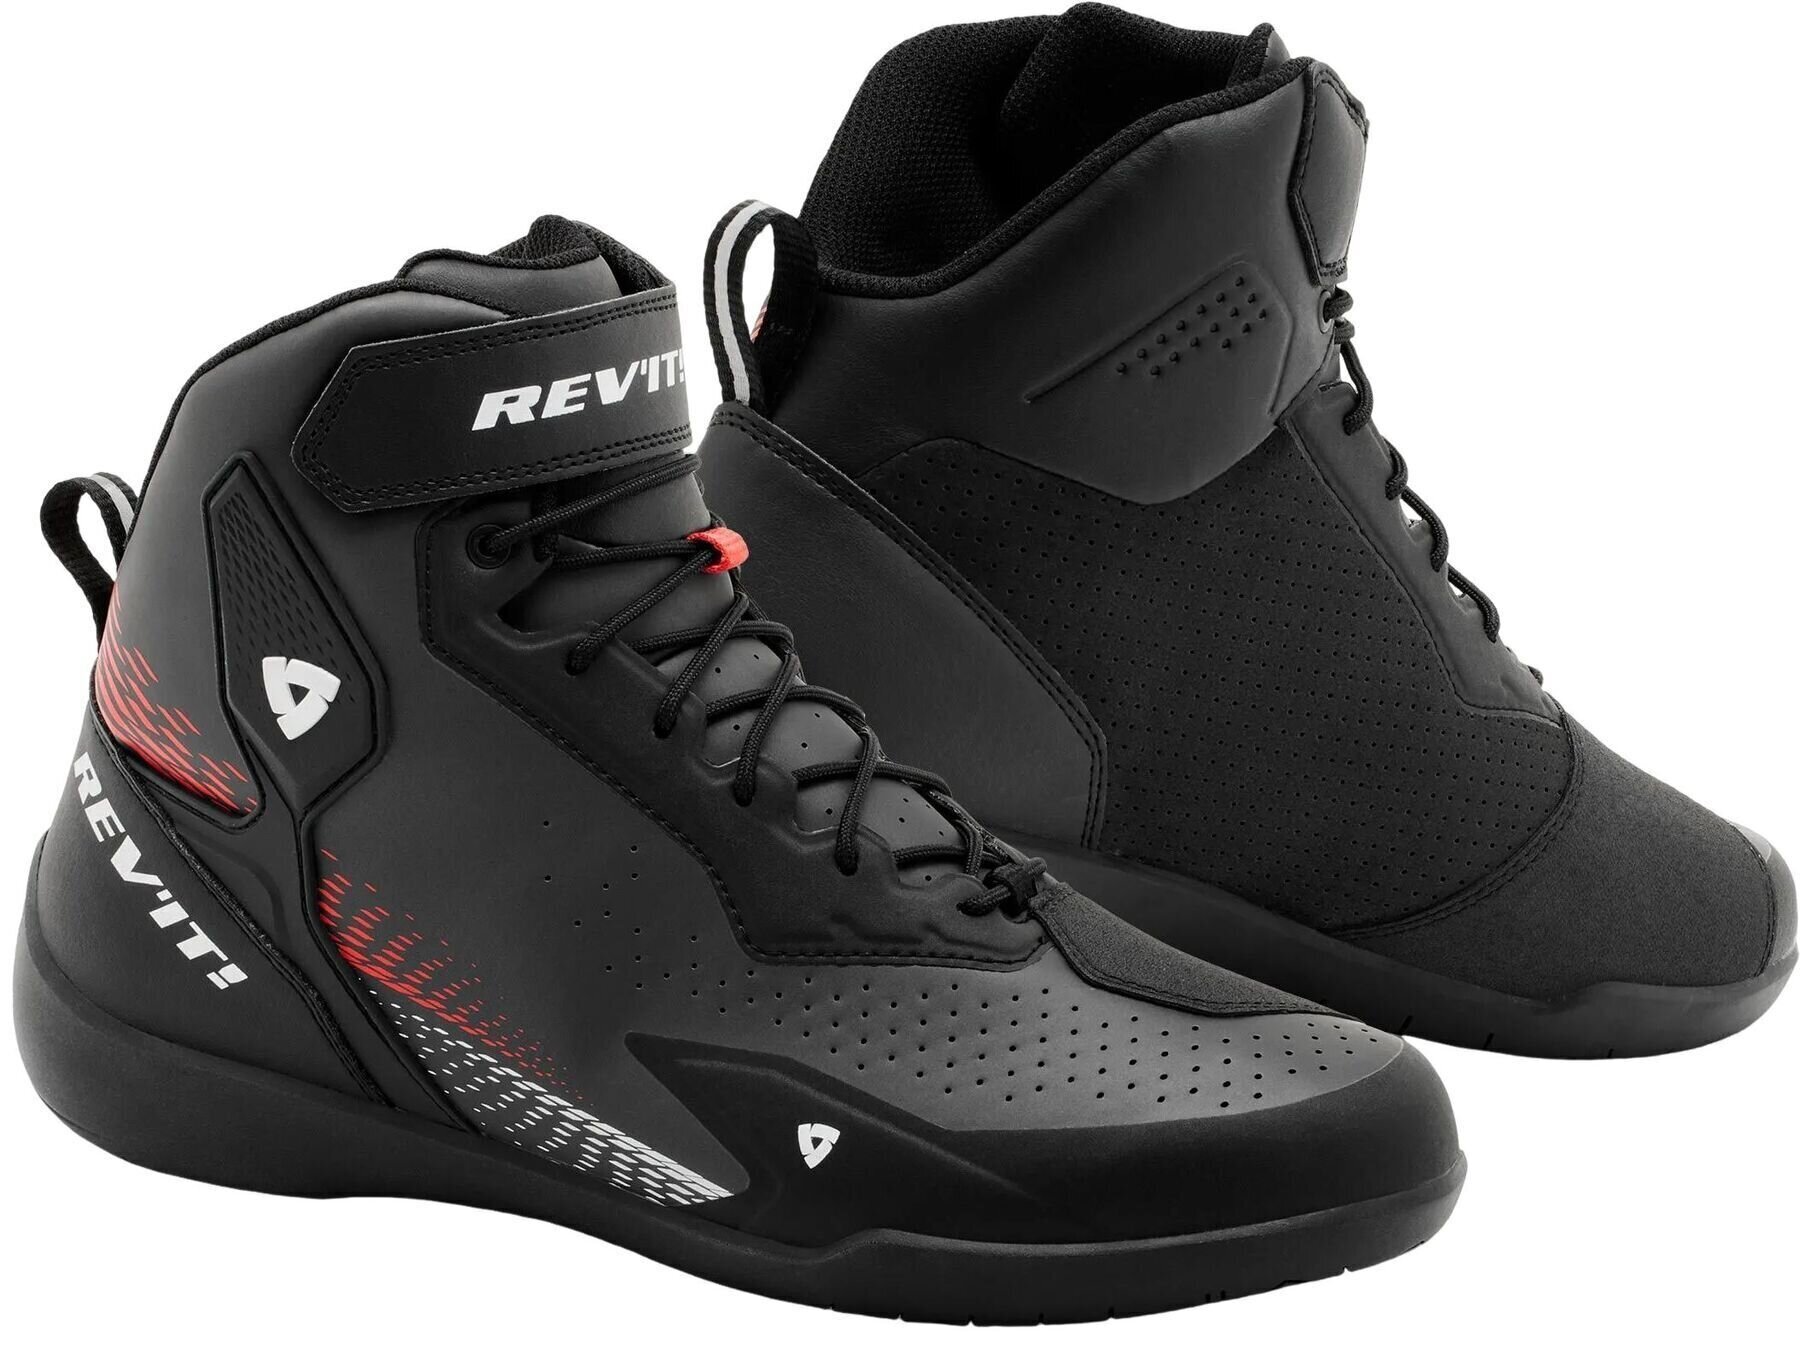 Topánky Rev'it! Shoes G-Force 2 Black/Neon Red 42 Topánky